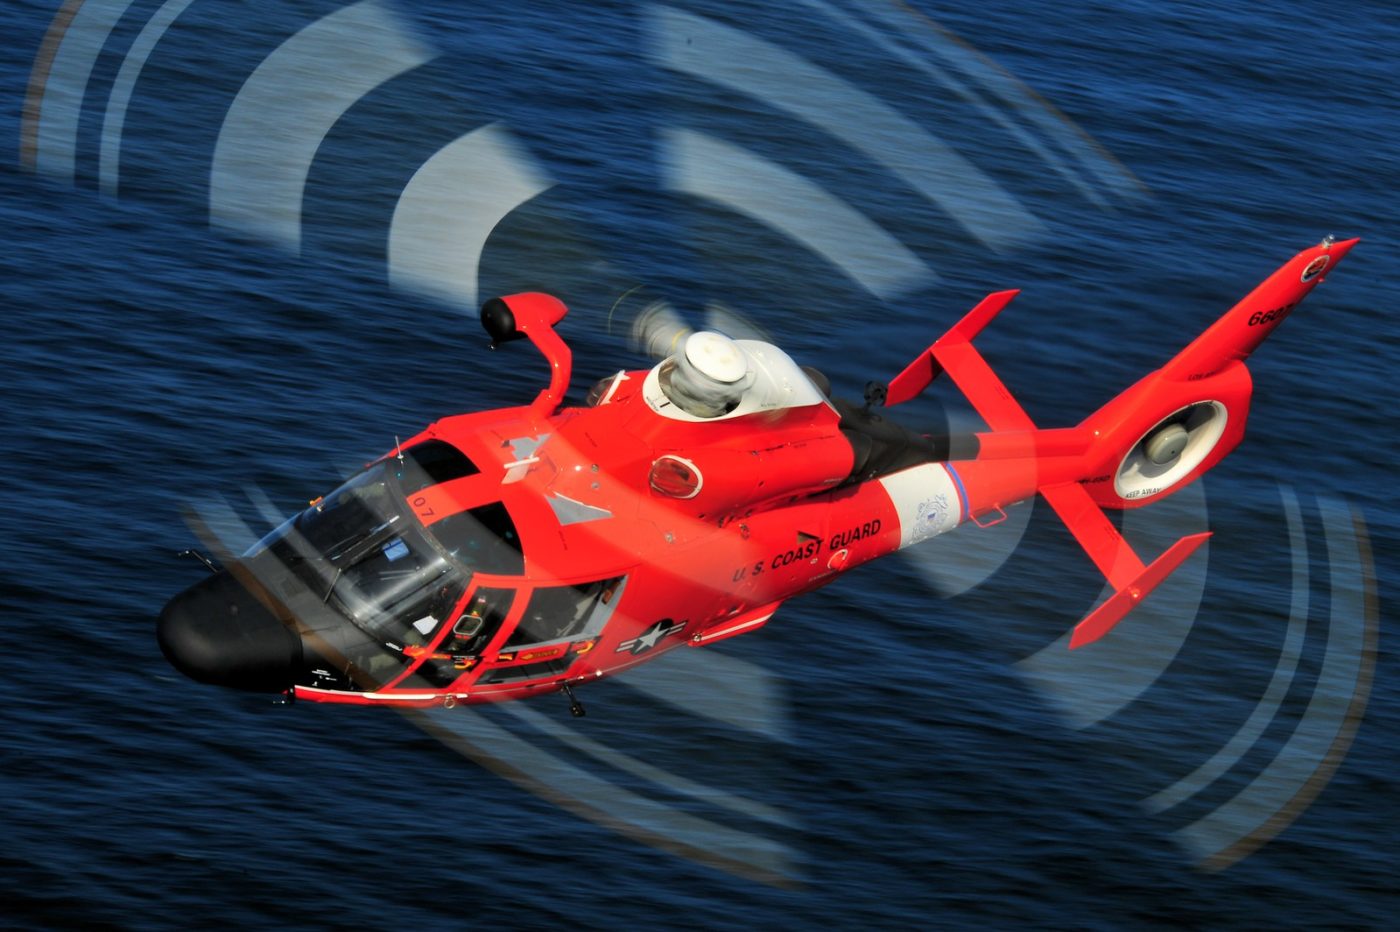 By the end of next year, the U.S. Coast Guard will start upgrading its MH-65 Dolphin helicopters with new avionics, yielding MH-65E models with enhanced capabilities and extended service life expectancies. Skip Robinson Photo